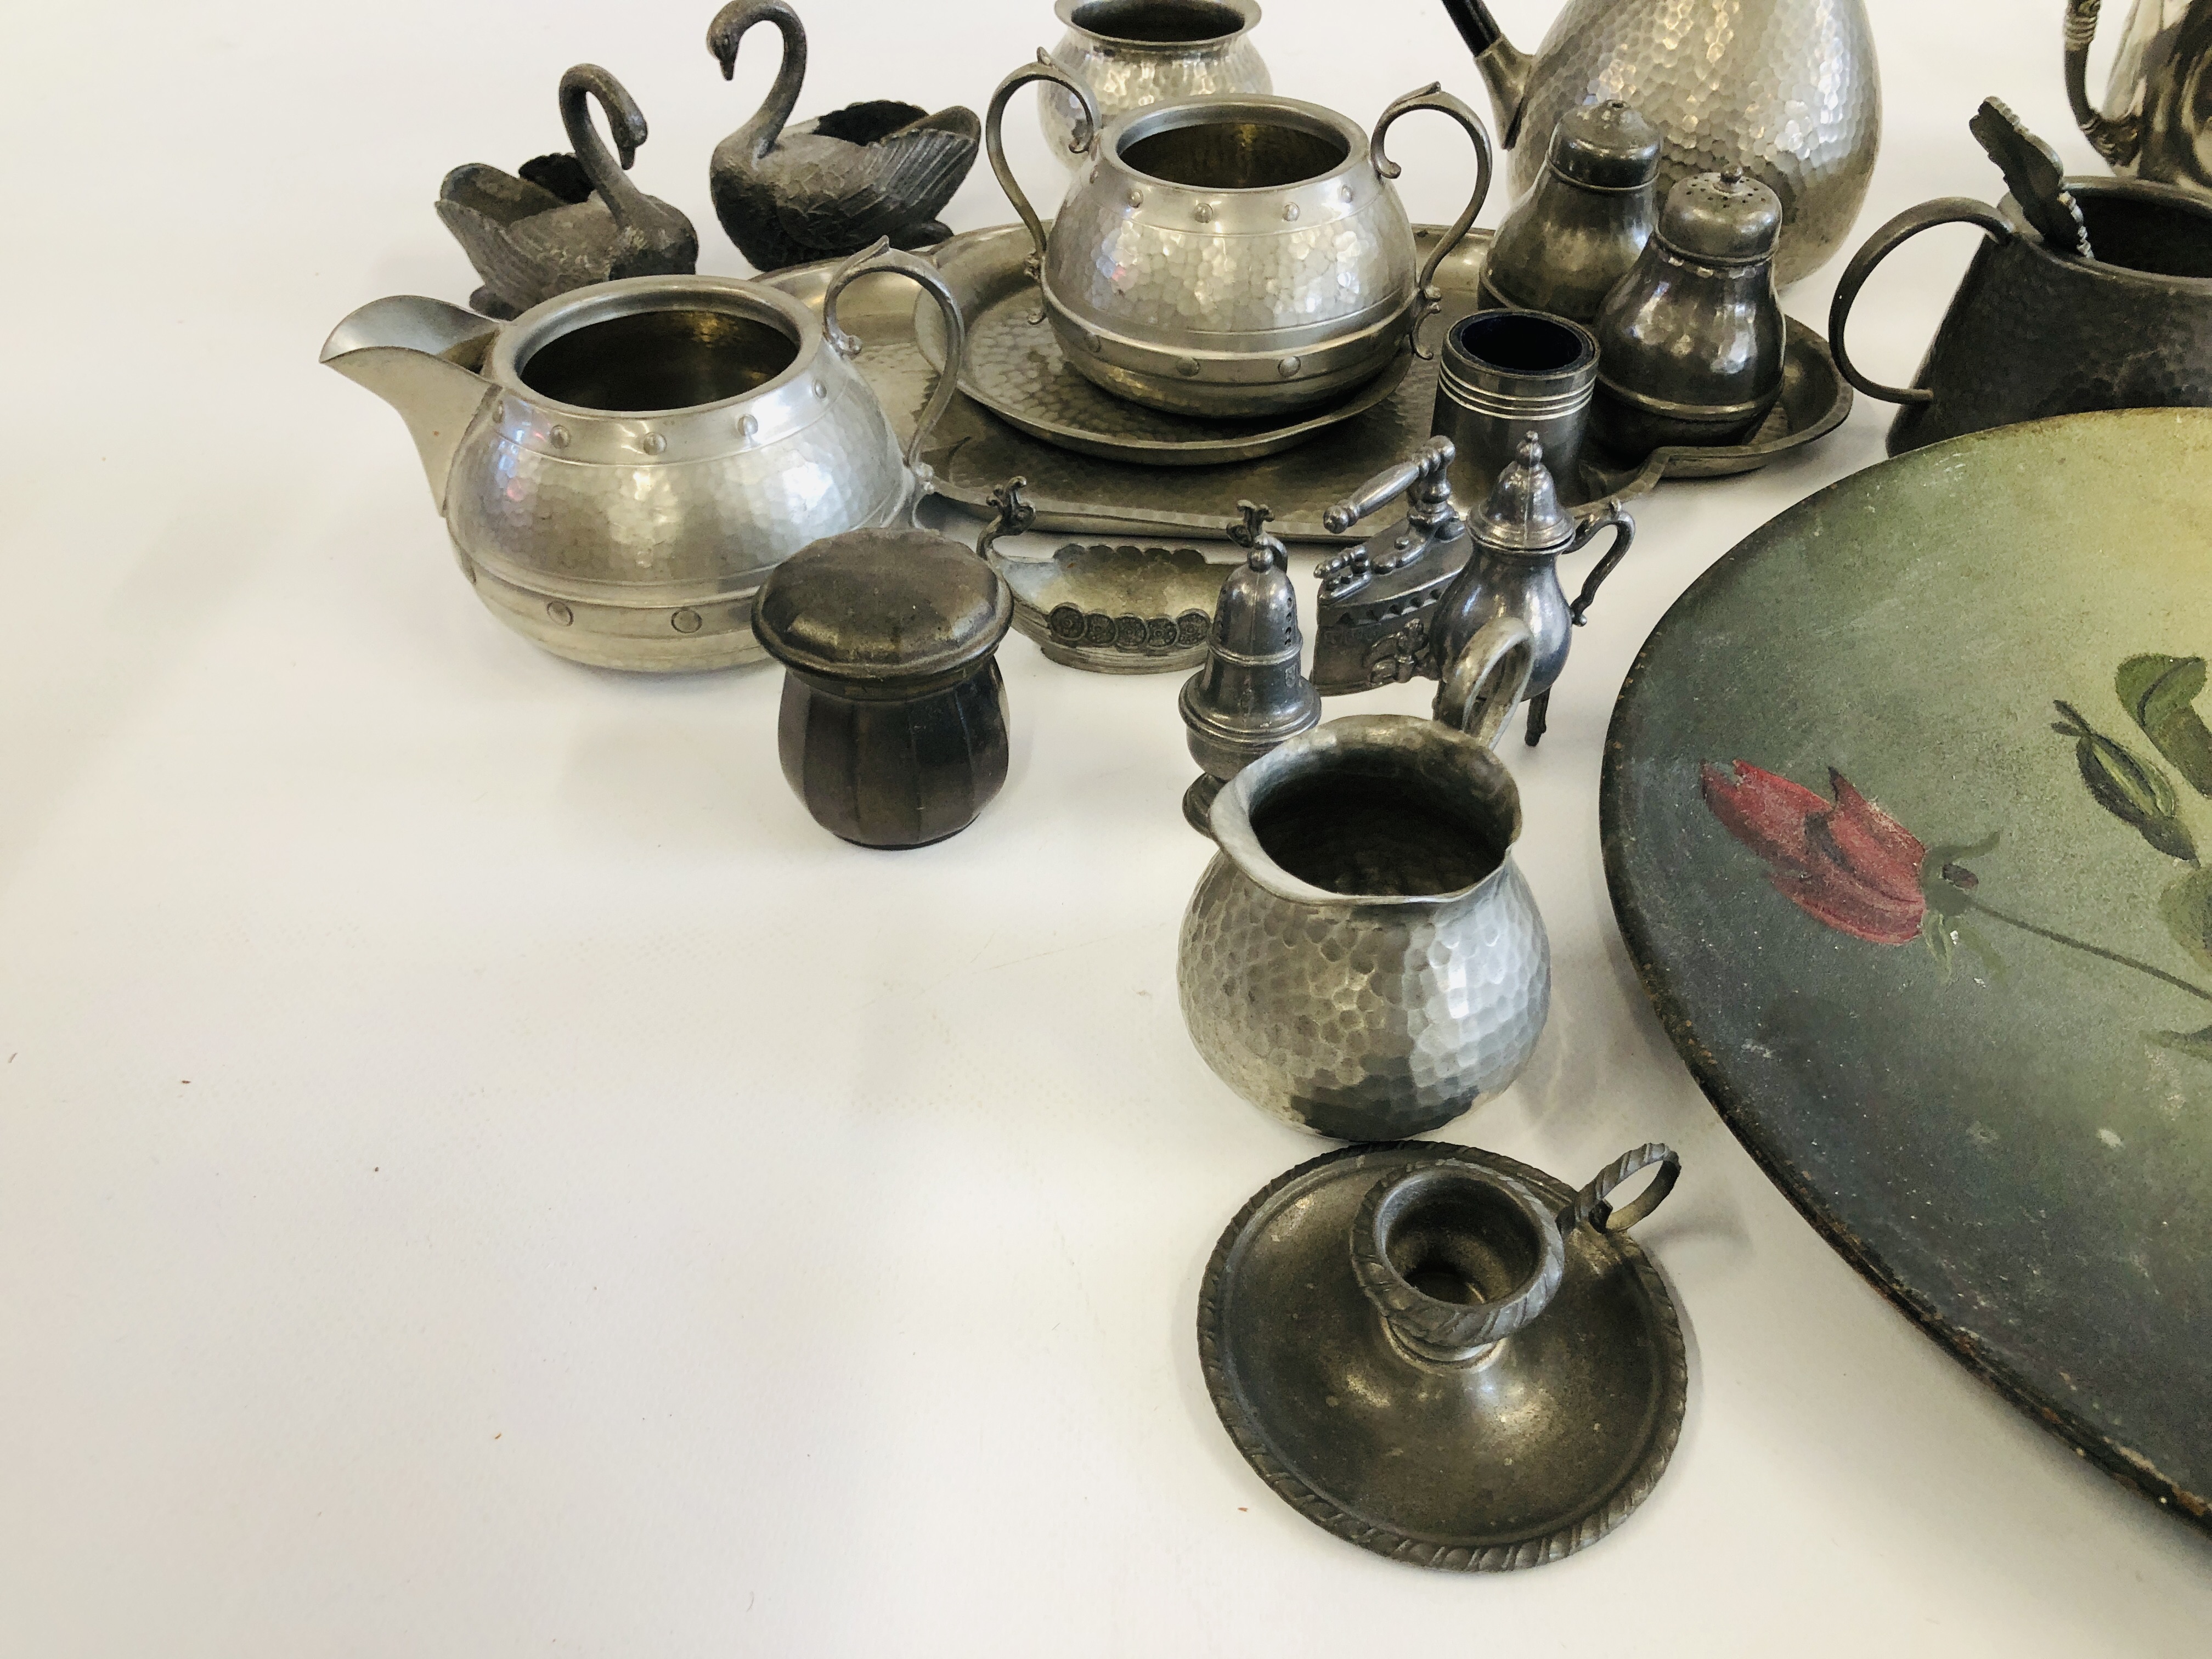 A BOX OF ASSORTED PLATED WARES ALONG WITH A BOX OF PEWTER WARES TO INCLUDE MINIATURE EXAMPLES. - Image 9 of 11